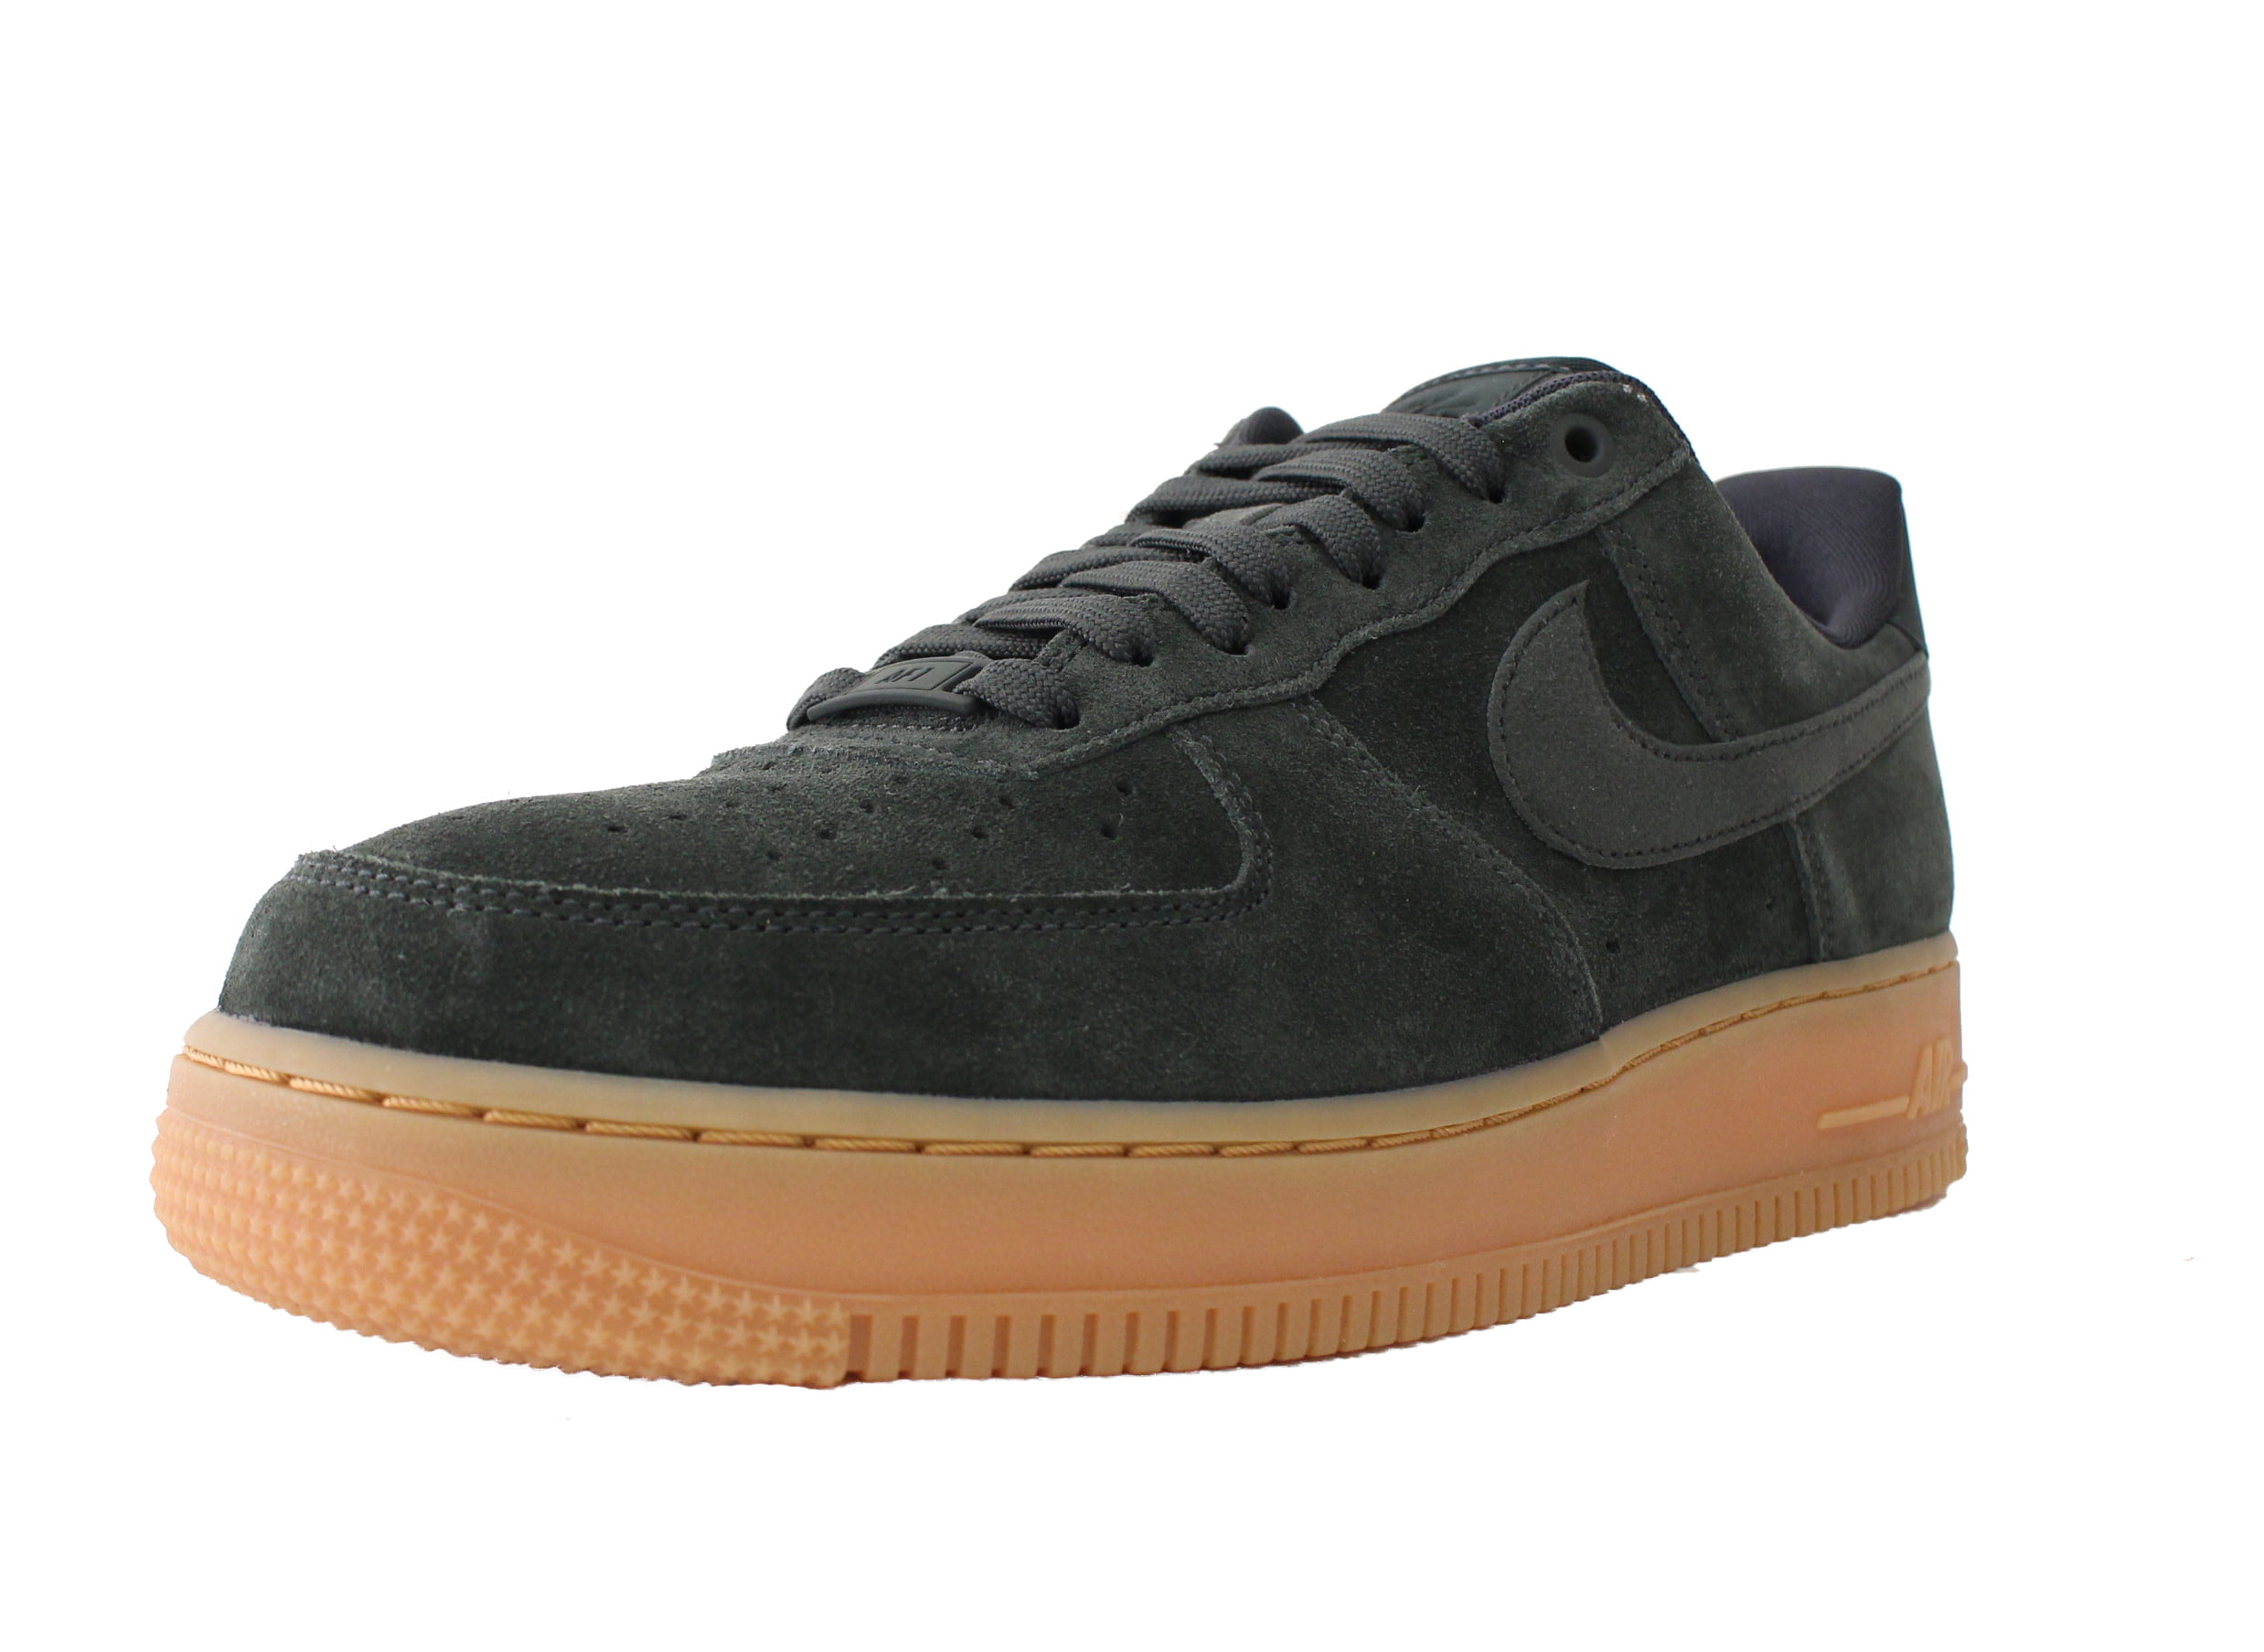 NIKE AIR FORCE 1 LOW 07 LV8 SUEDE SZ 11 OUTDOOR GREEN GUM BOTTOM AA1117 300  